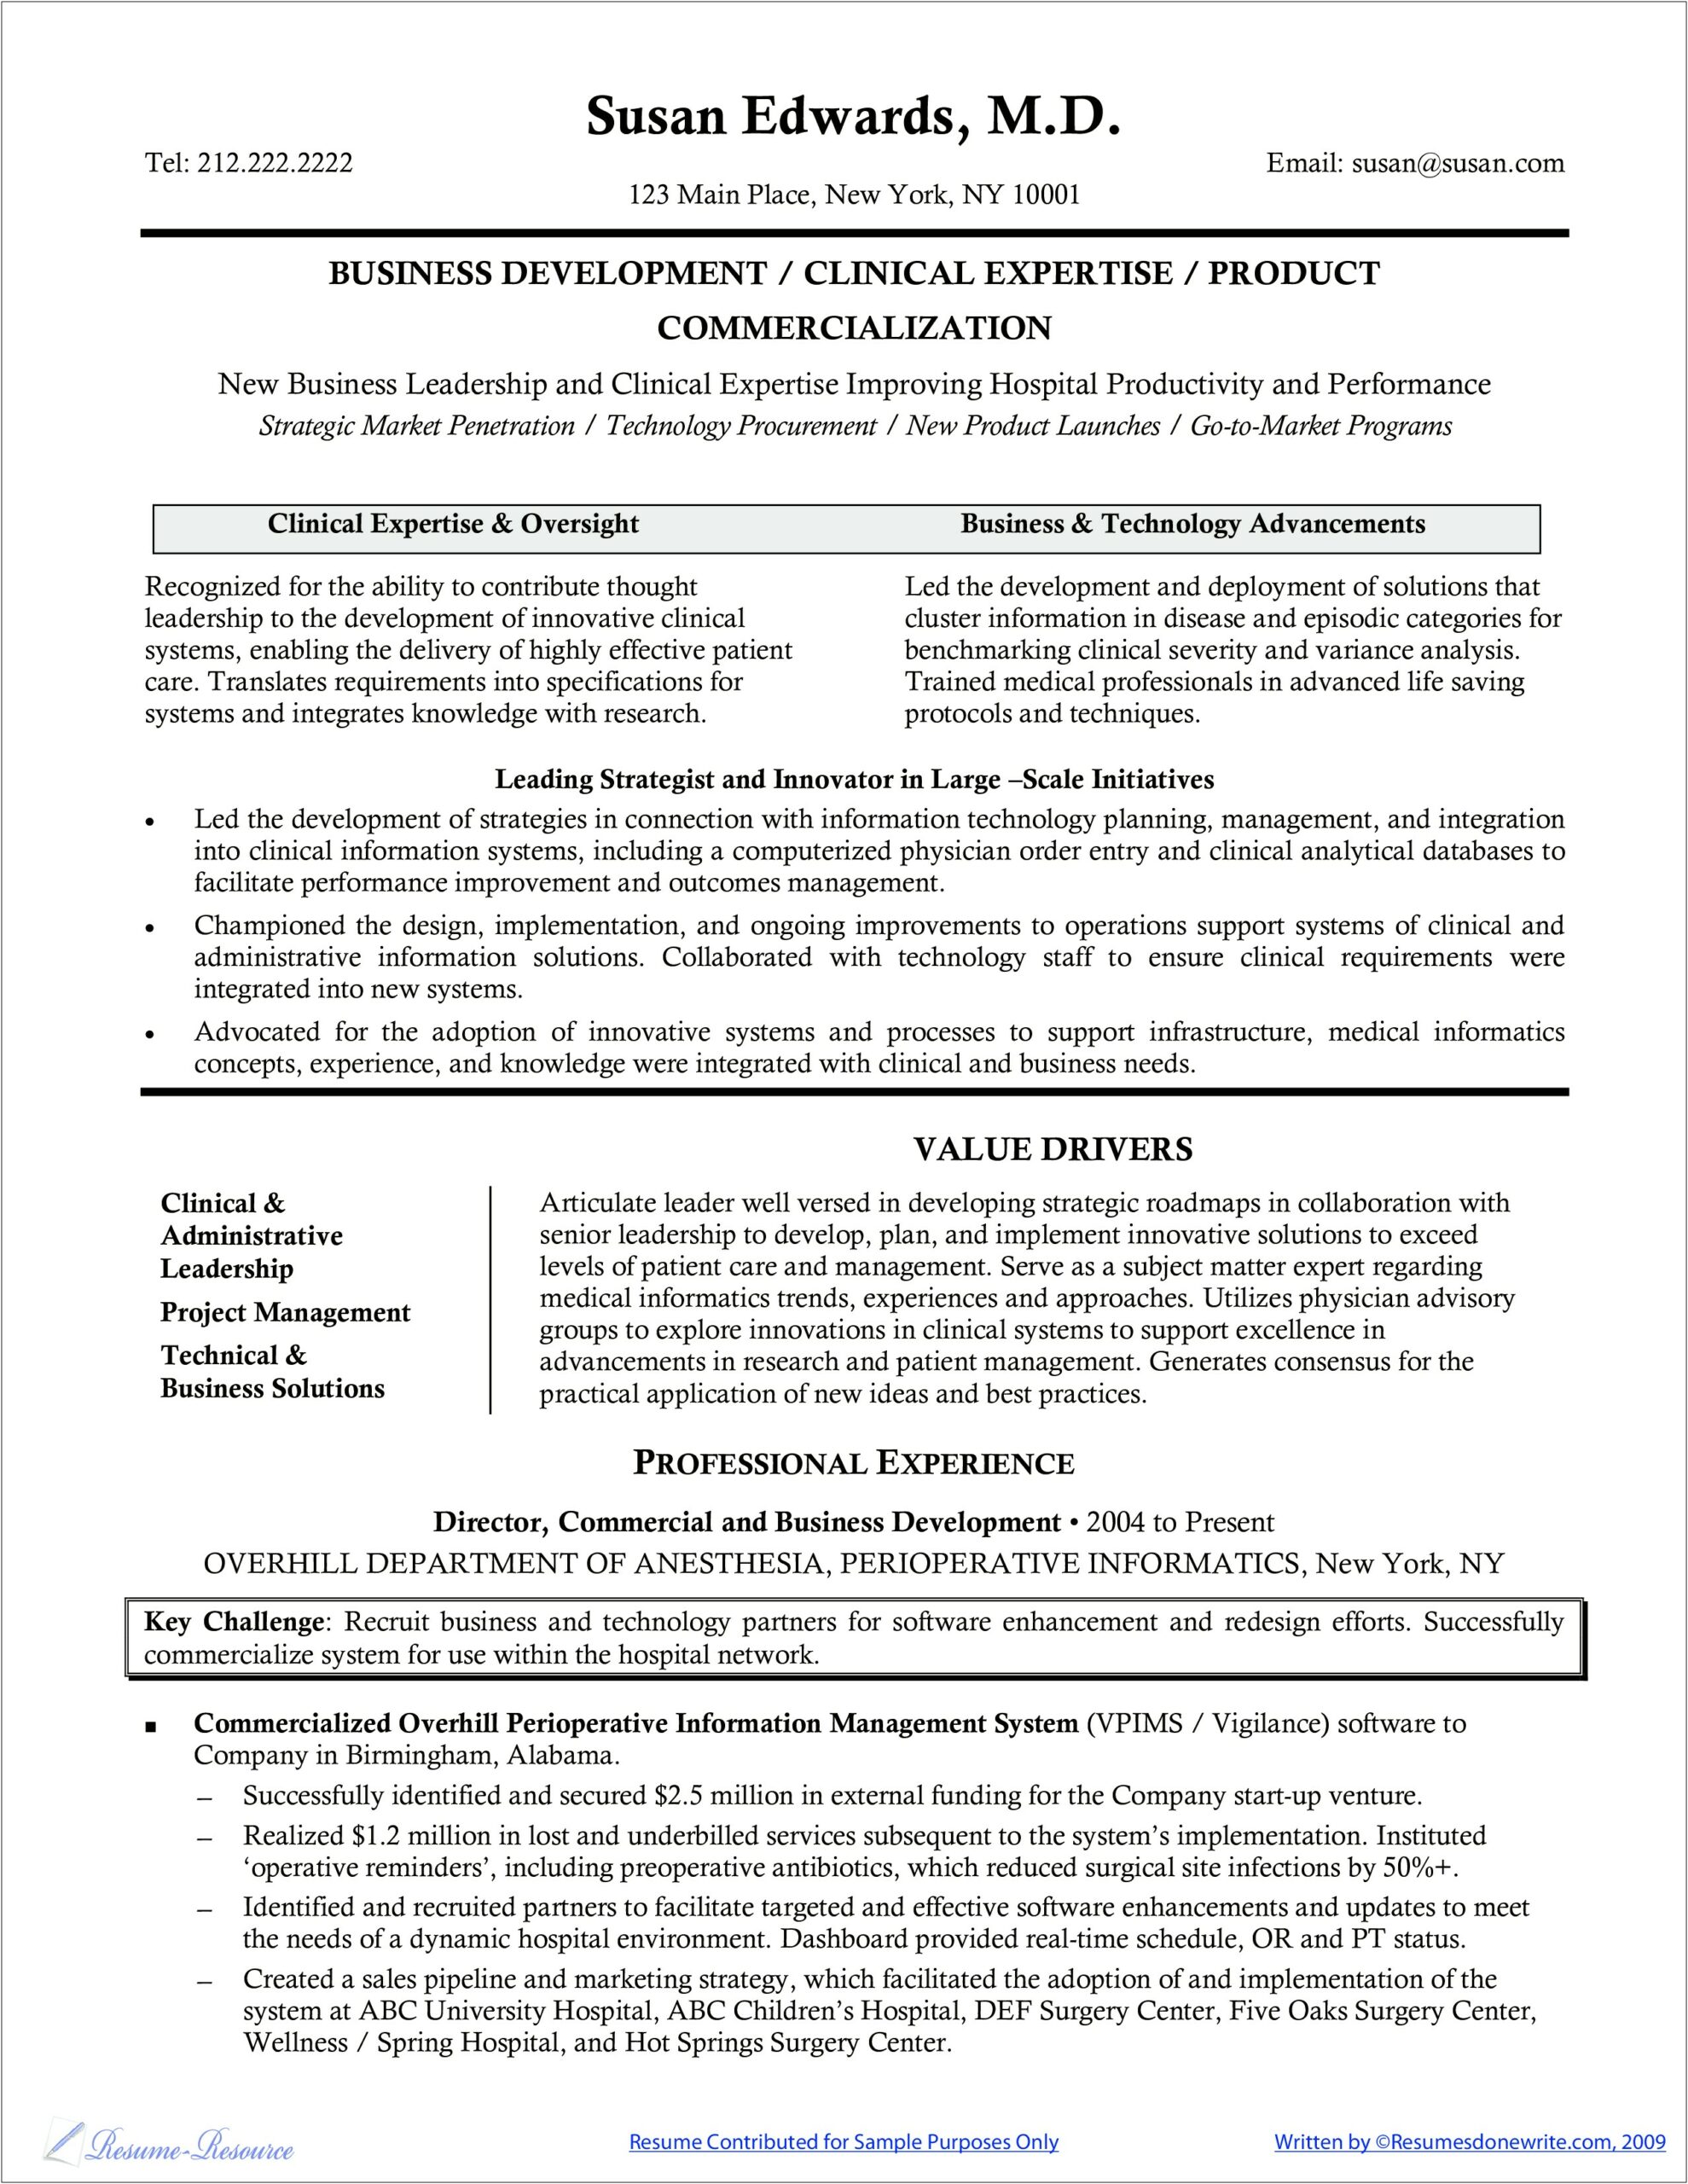 Sample Resume For Medical Research